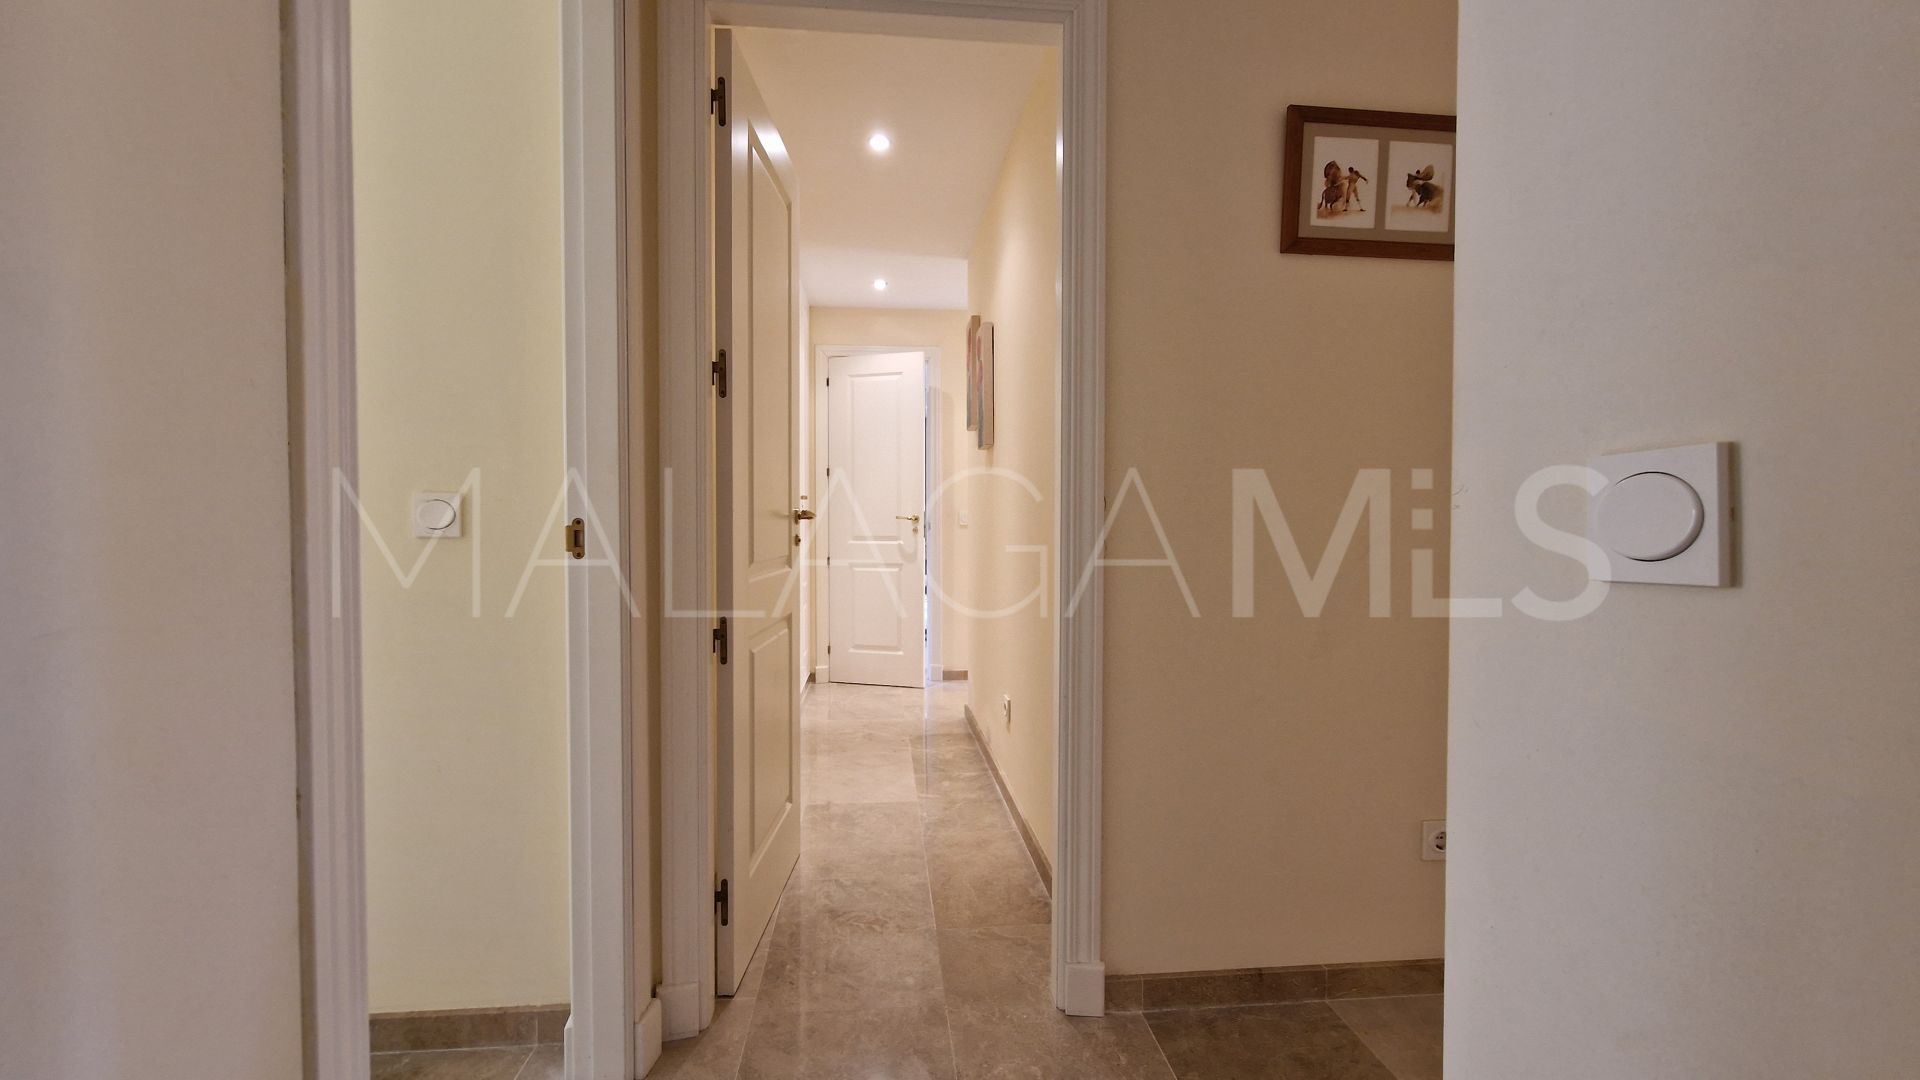 Ground floor apartment with 3 bedrooms for sale in La Duquesa